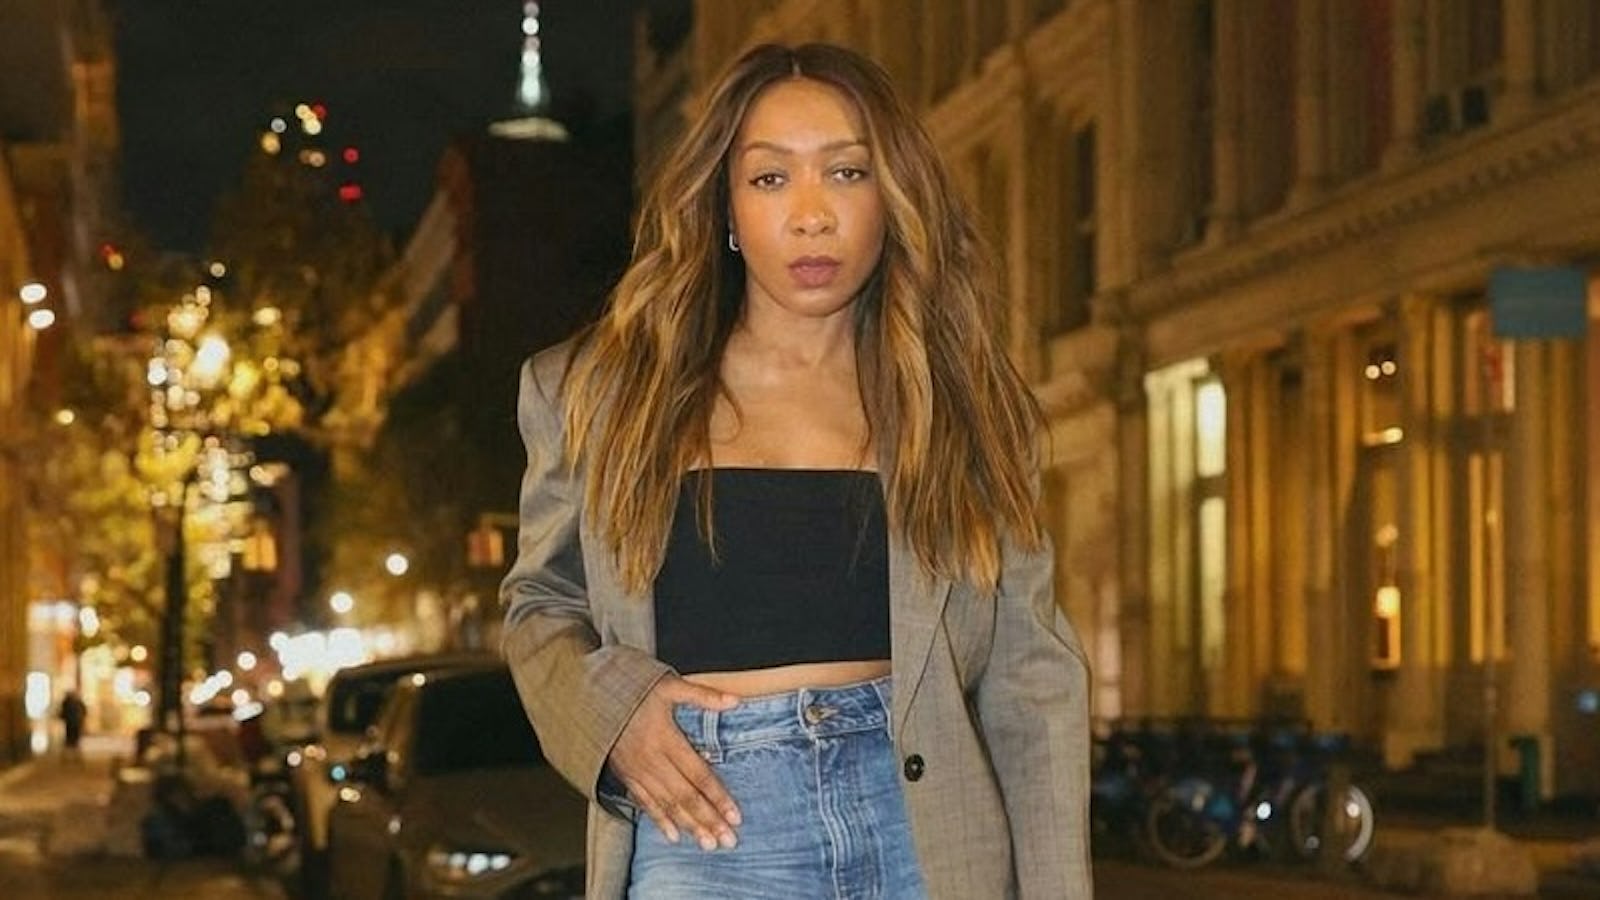 Karen Blanchard poses on a Soho sidewalk at night wearing an oversize blazer, cropped tube top, wide leg jeans, and black boots.